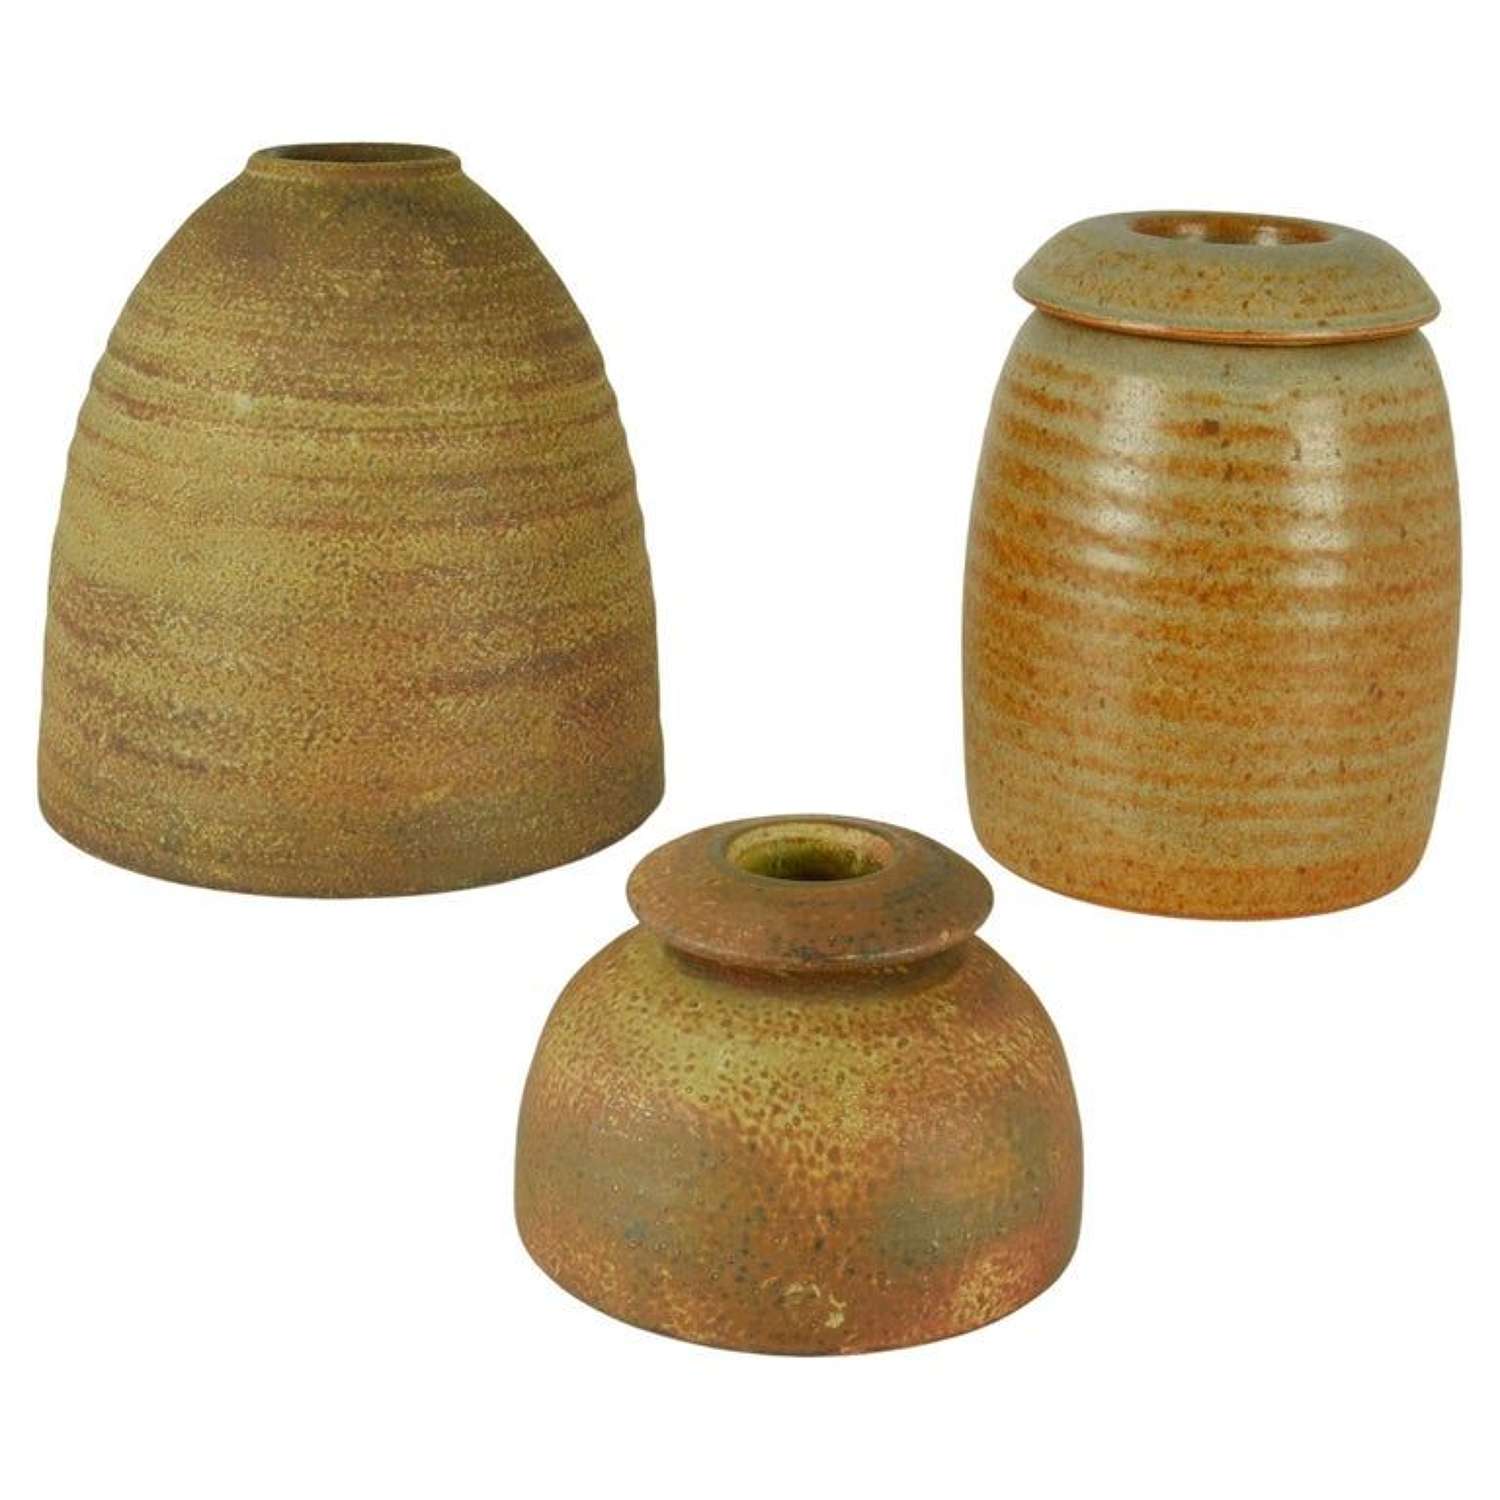 Mobach Studio Pottery Vases Beehive Shape